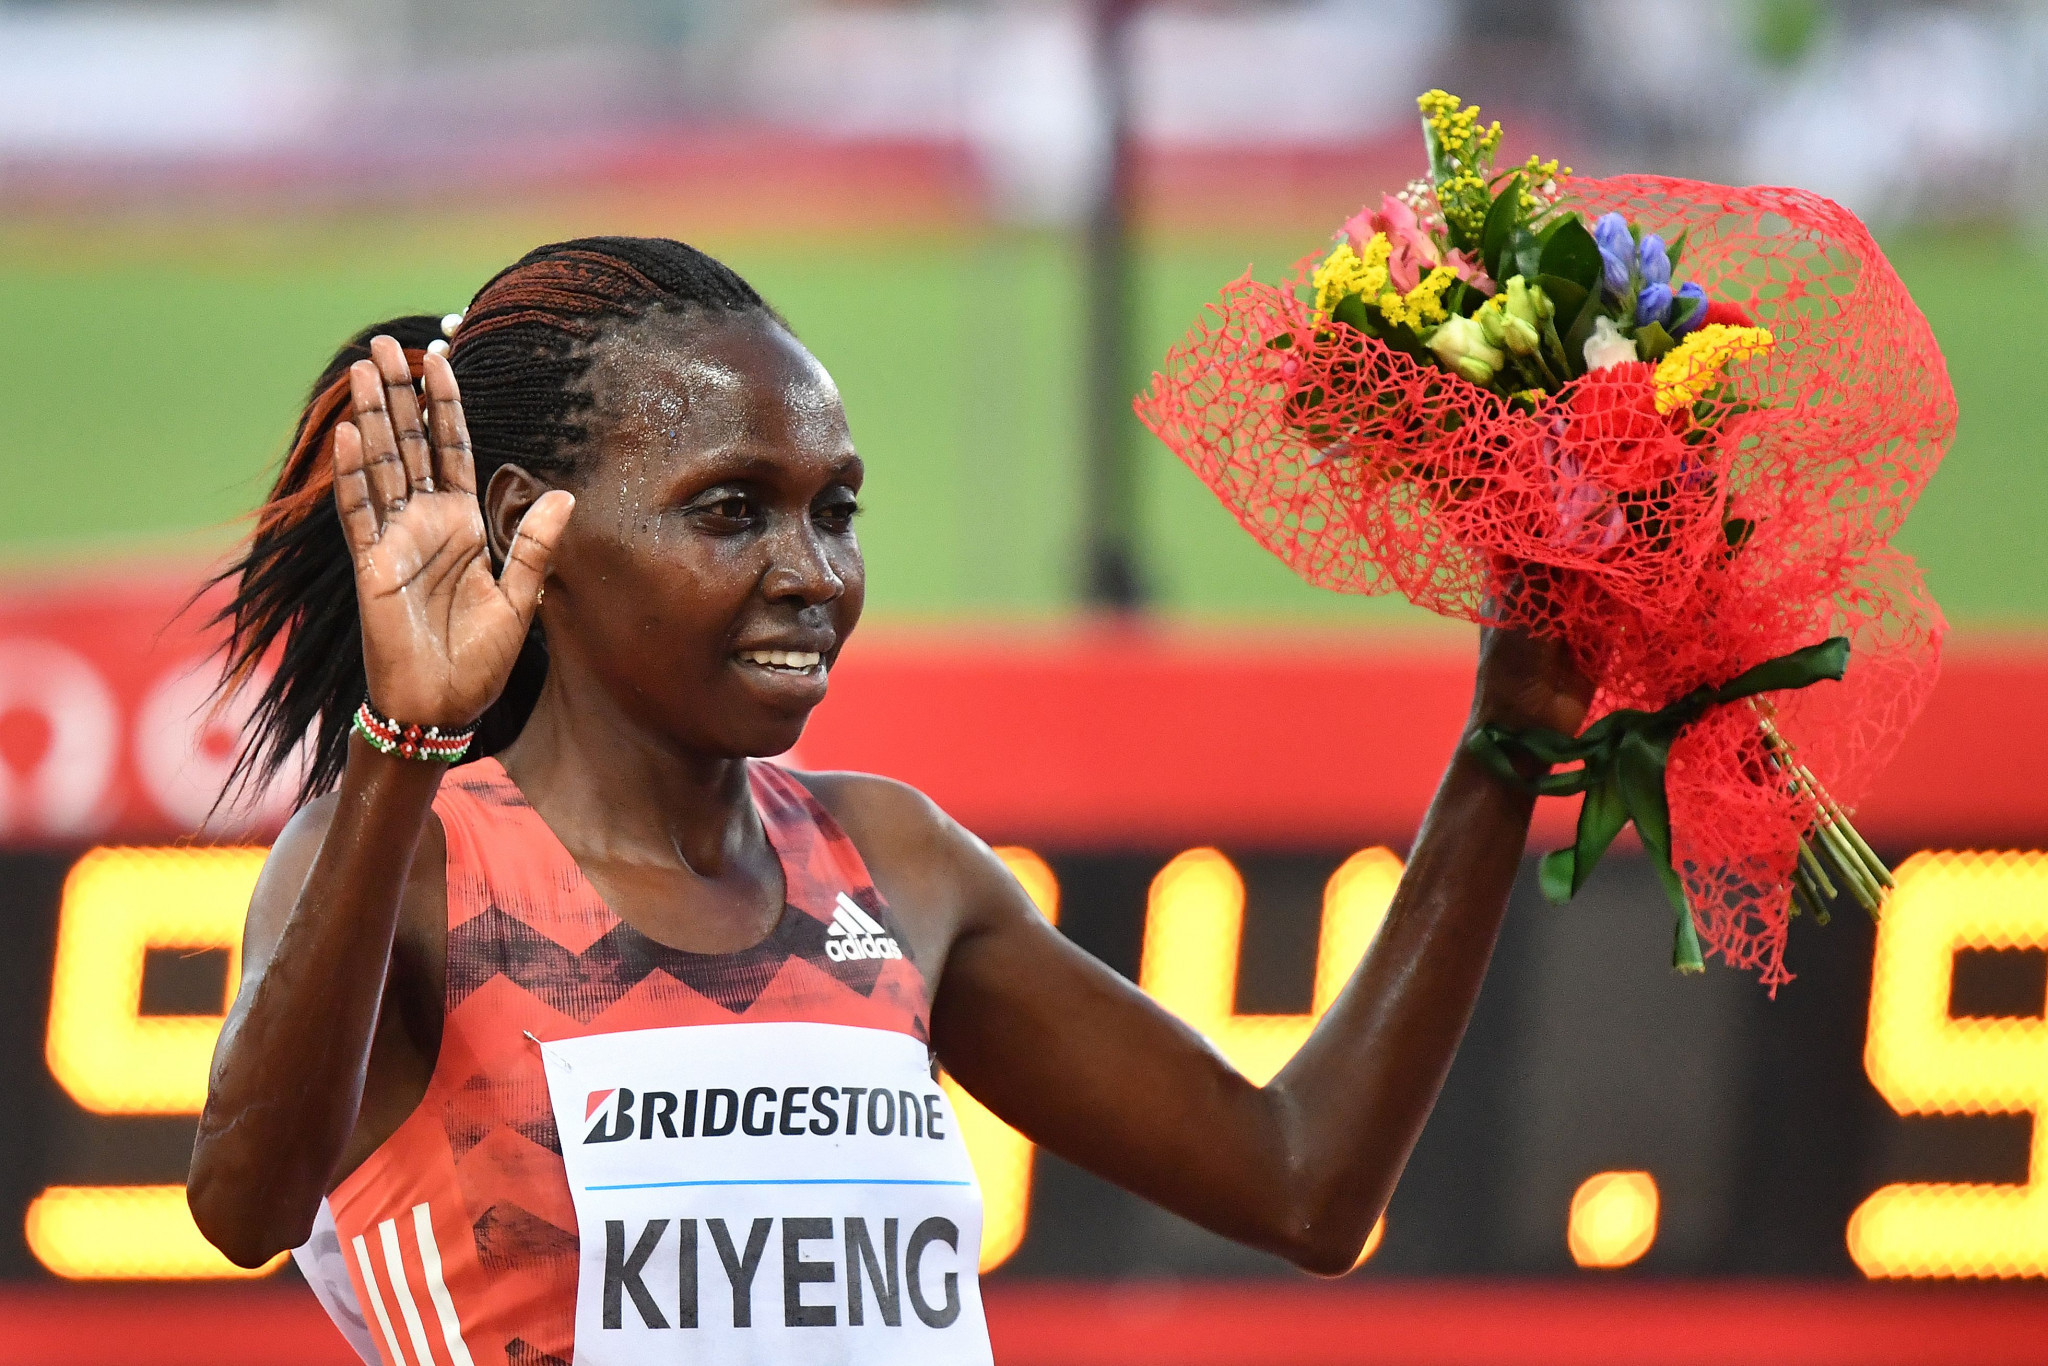 Hyvin Kiyeng was first home in the women's steeplechase ©Getty Images